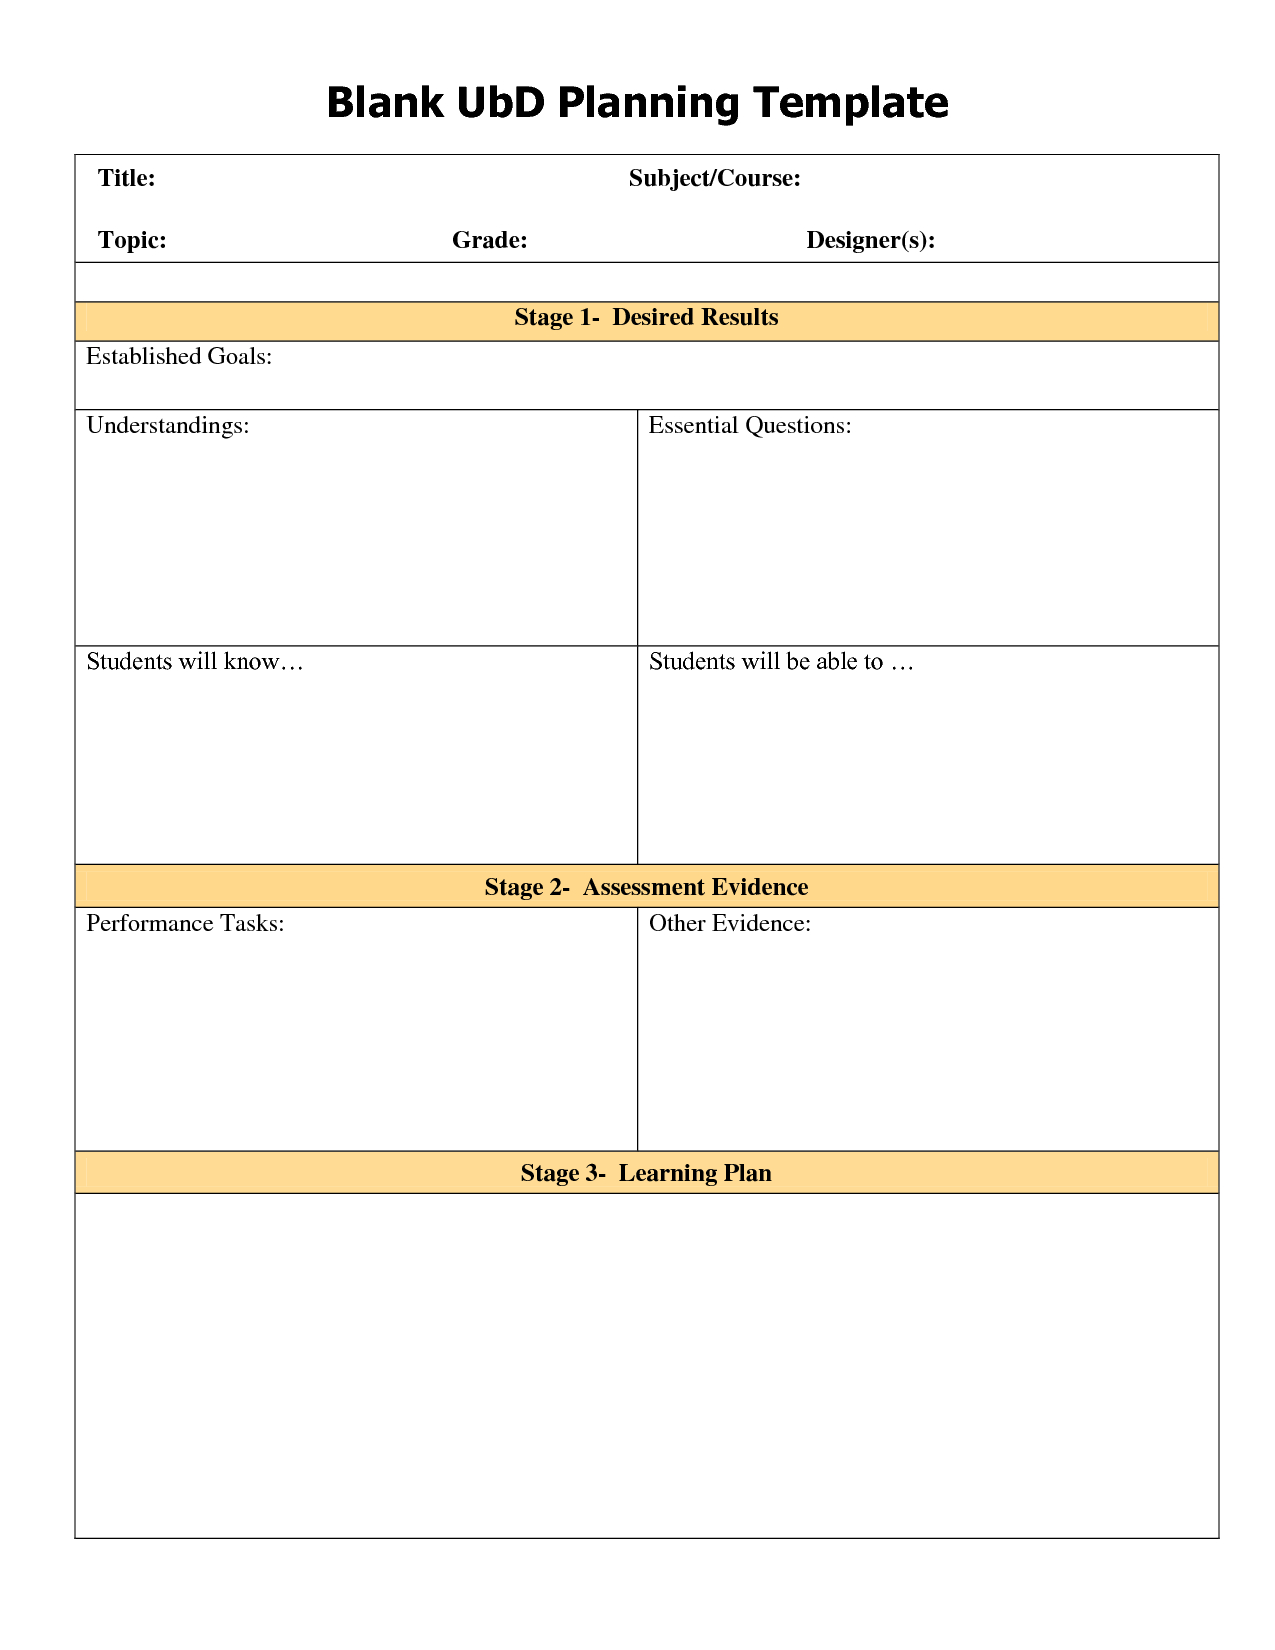 Blank Ubd Template | Blank Ubd Planning Template Within Blank Unit Lesson Plan Template